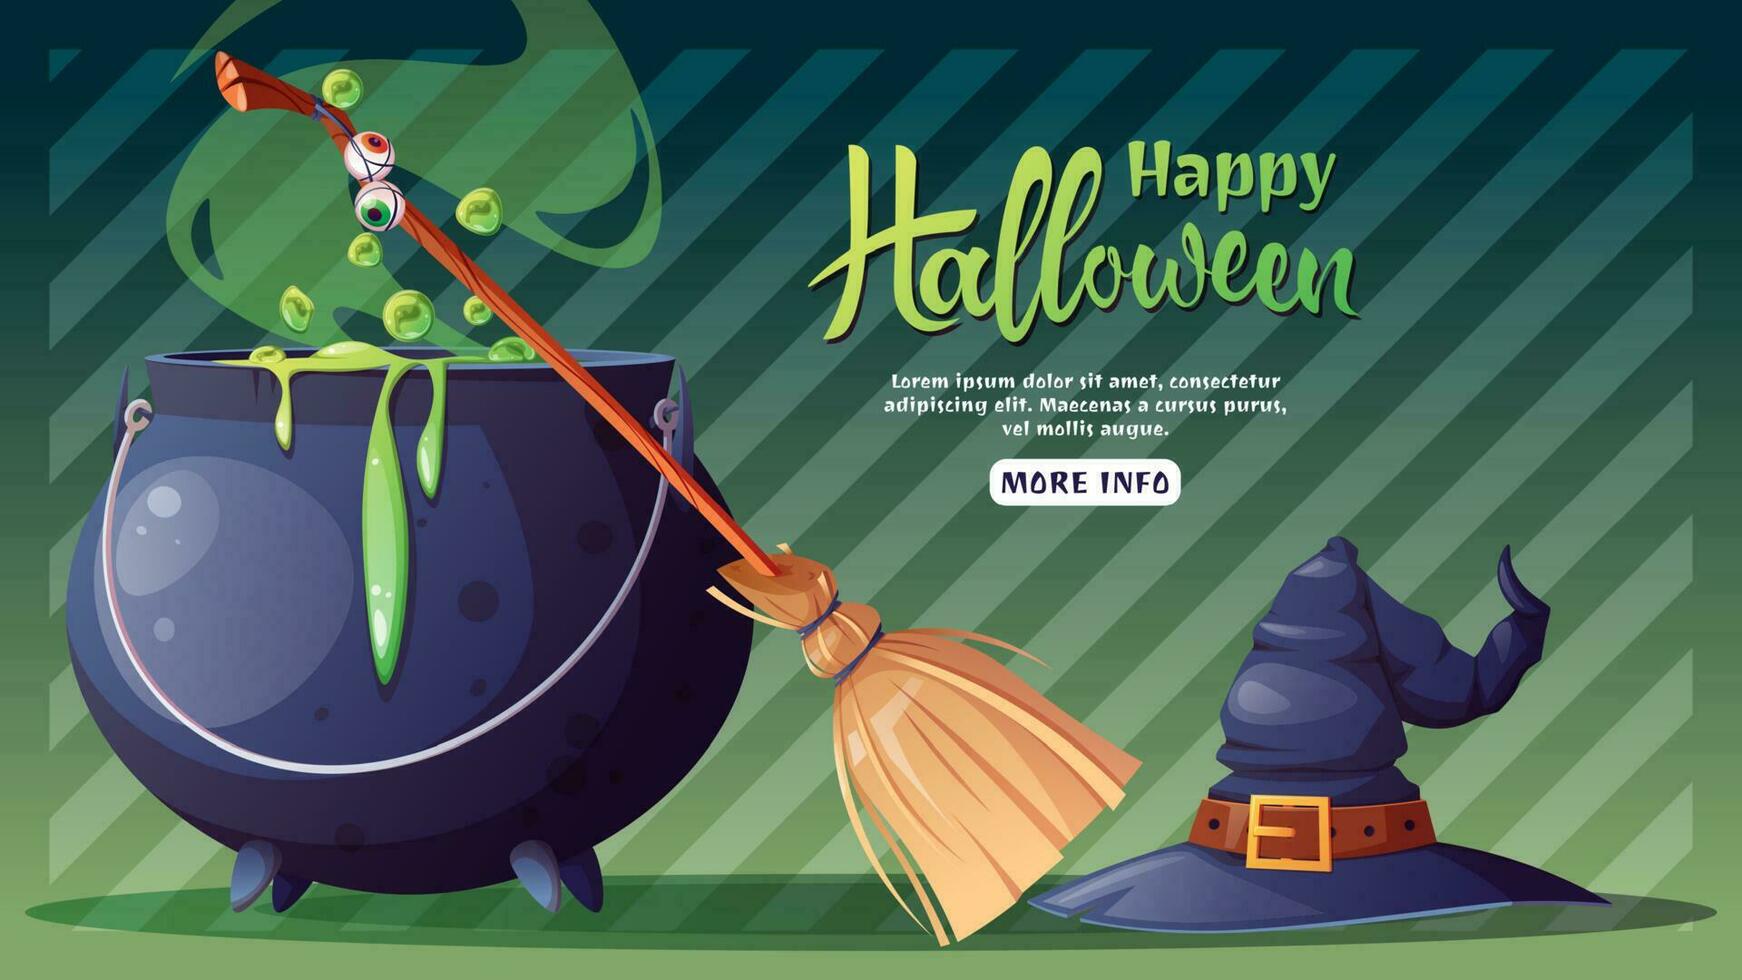 Halloween banner with witch s cauldron, broom and hat. Happy Halloween. Web banner, poster, advertising, background, flyer, holiday card. Cartoon vector illustration